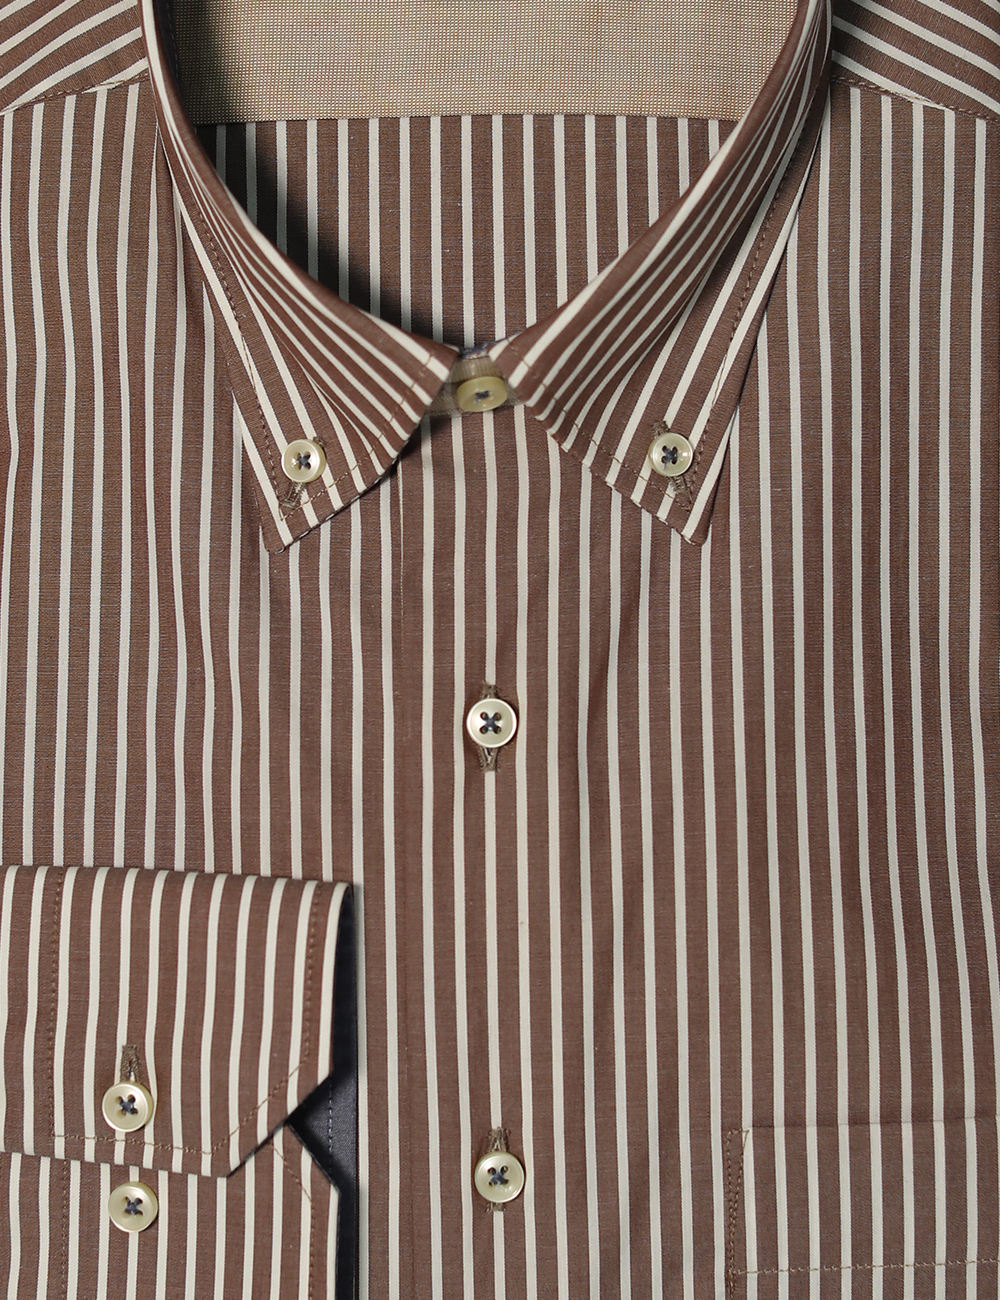 ANDREA ROSSI Tailored Fit Shirt, Striped Brown